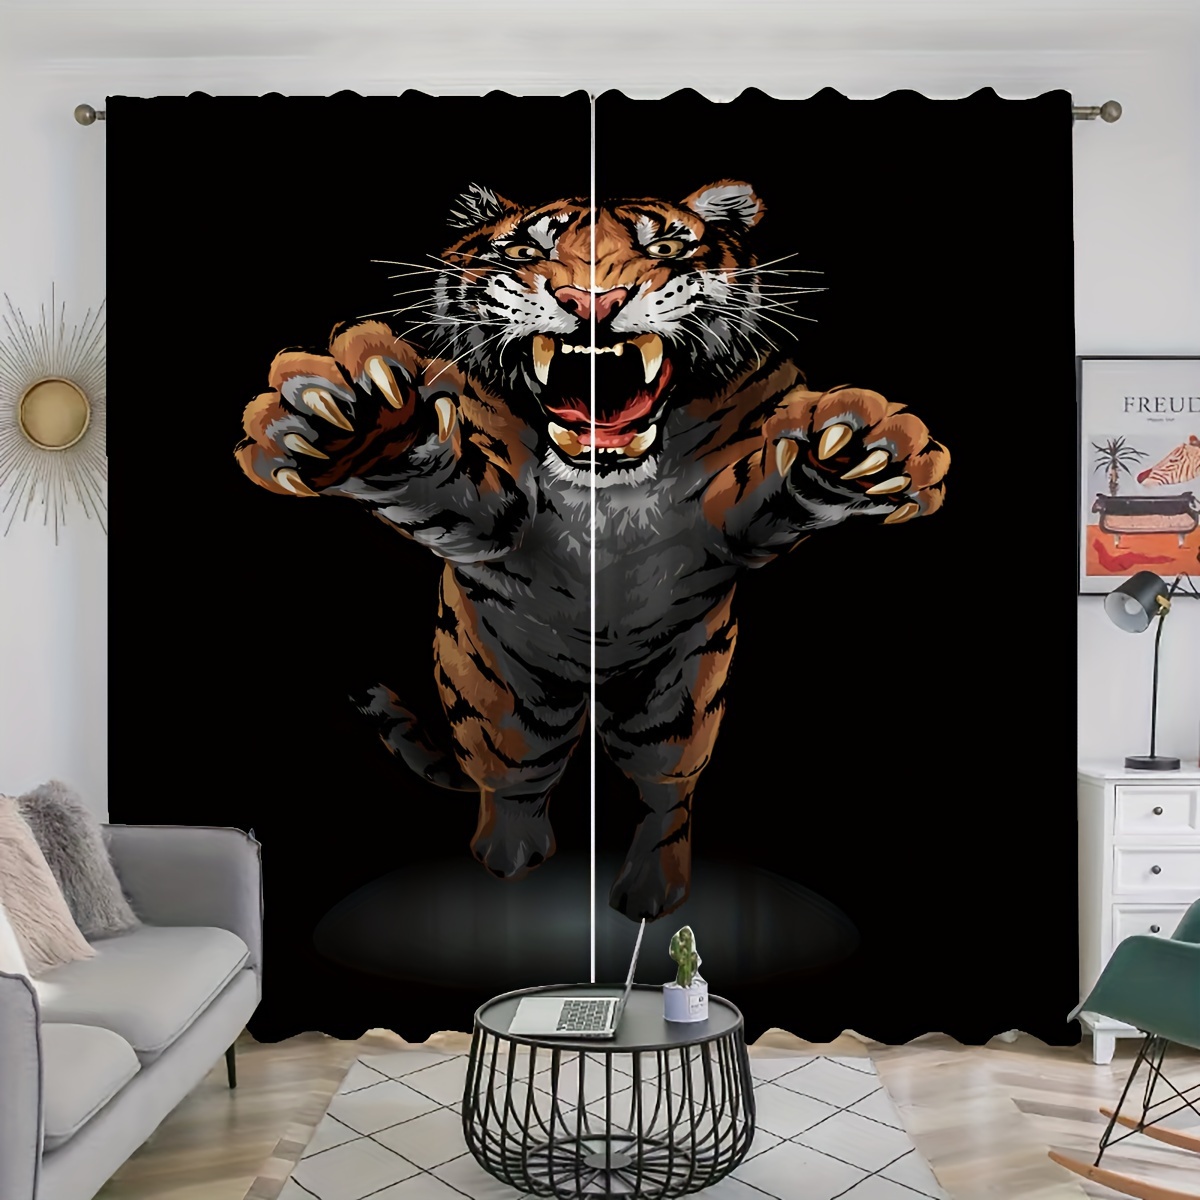 

2pcs Angry Tiger Curtains, Rod Pocket Curtain, Suitable For Restaurant Public Place Living Room Bedroom Office Study, Home Decor